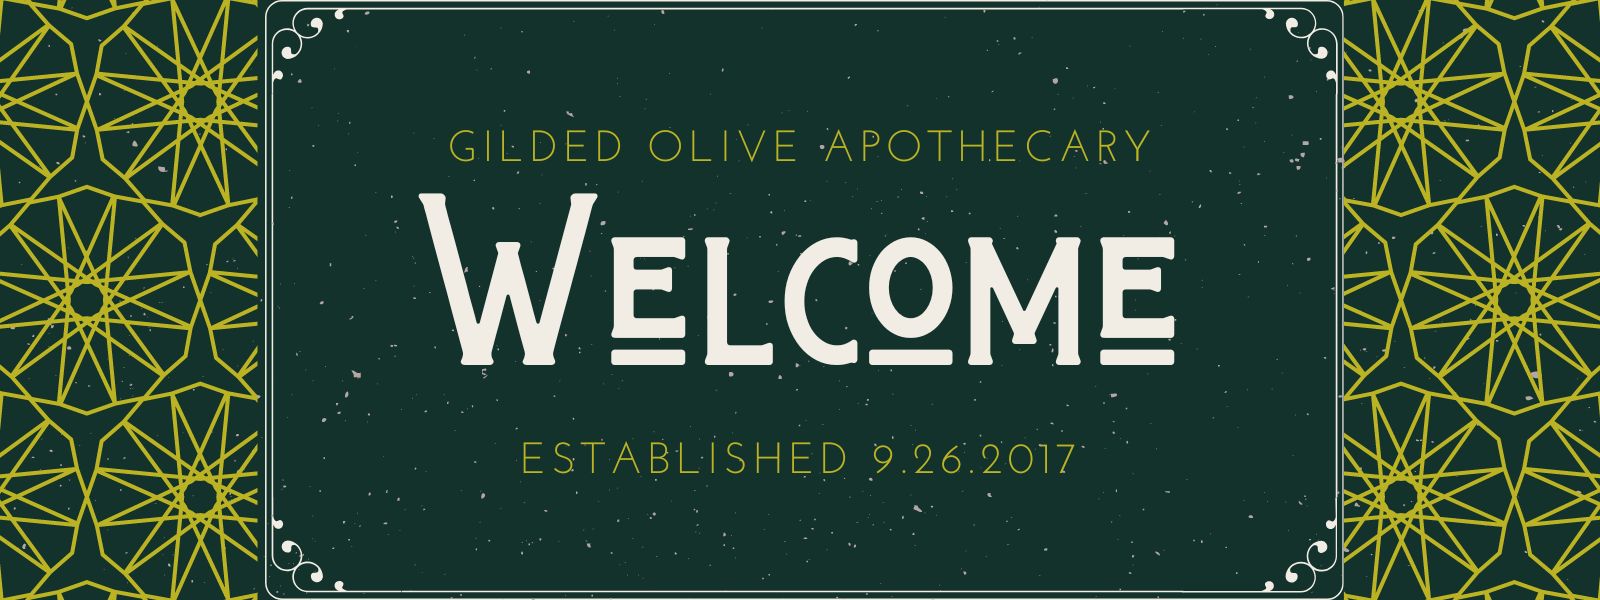 Welcome! Gilded Olive Apothecary